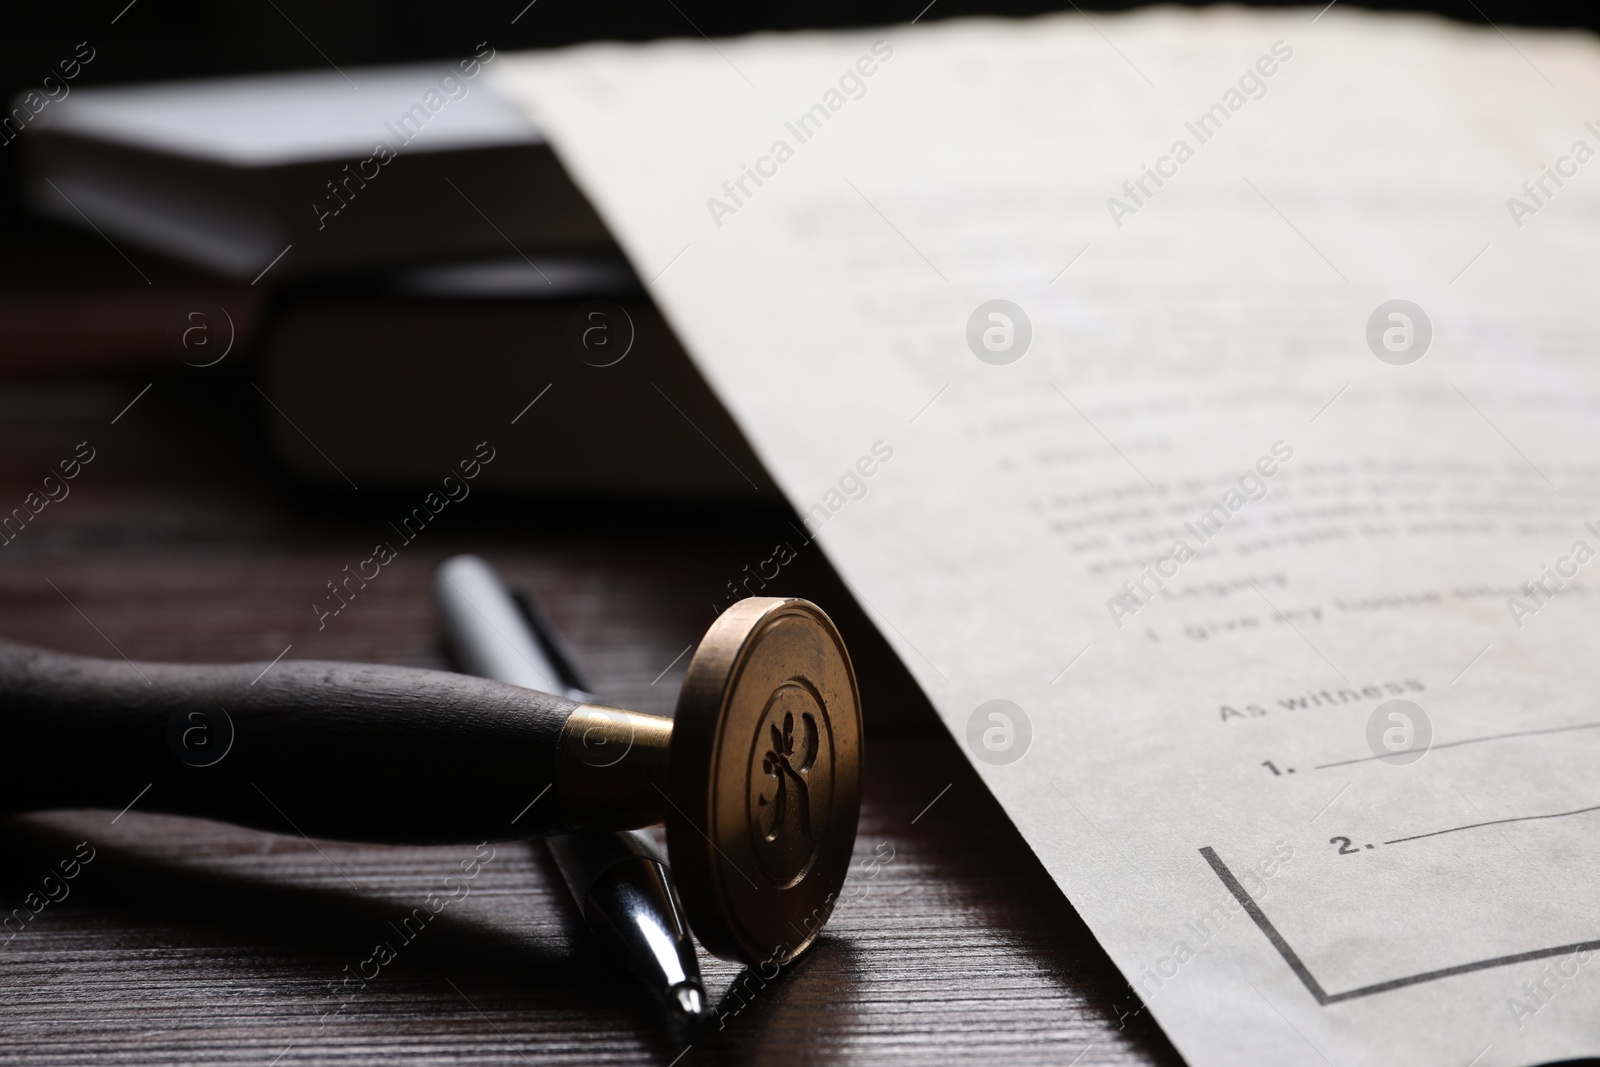 Photo of Last Will and Testament, stamp seal and pen on wooden table, closeup